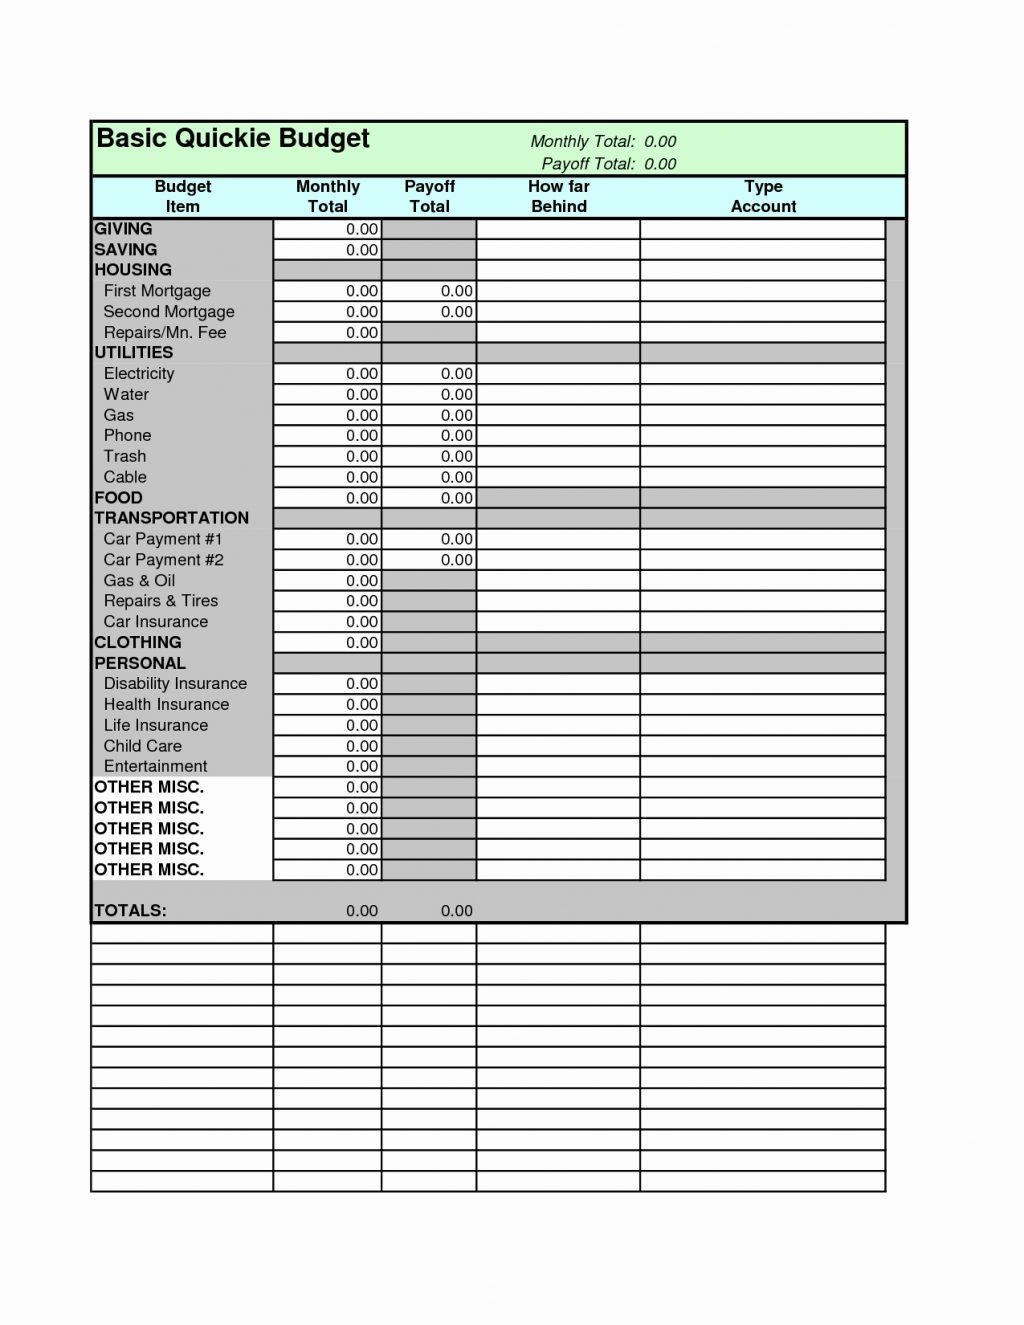 Business Plan Dave Ramsey Budget Spreadsheet Model Time Magazine Get To Downloadable Spreadsheet